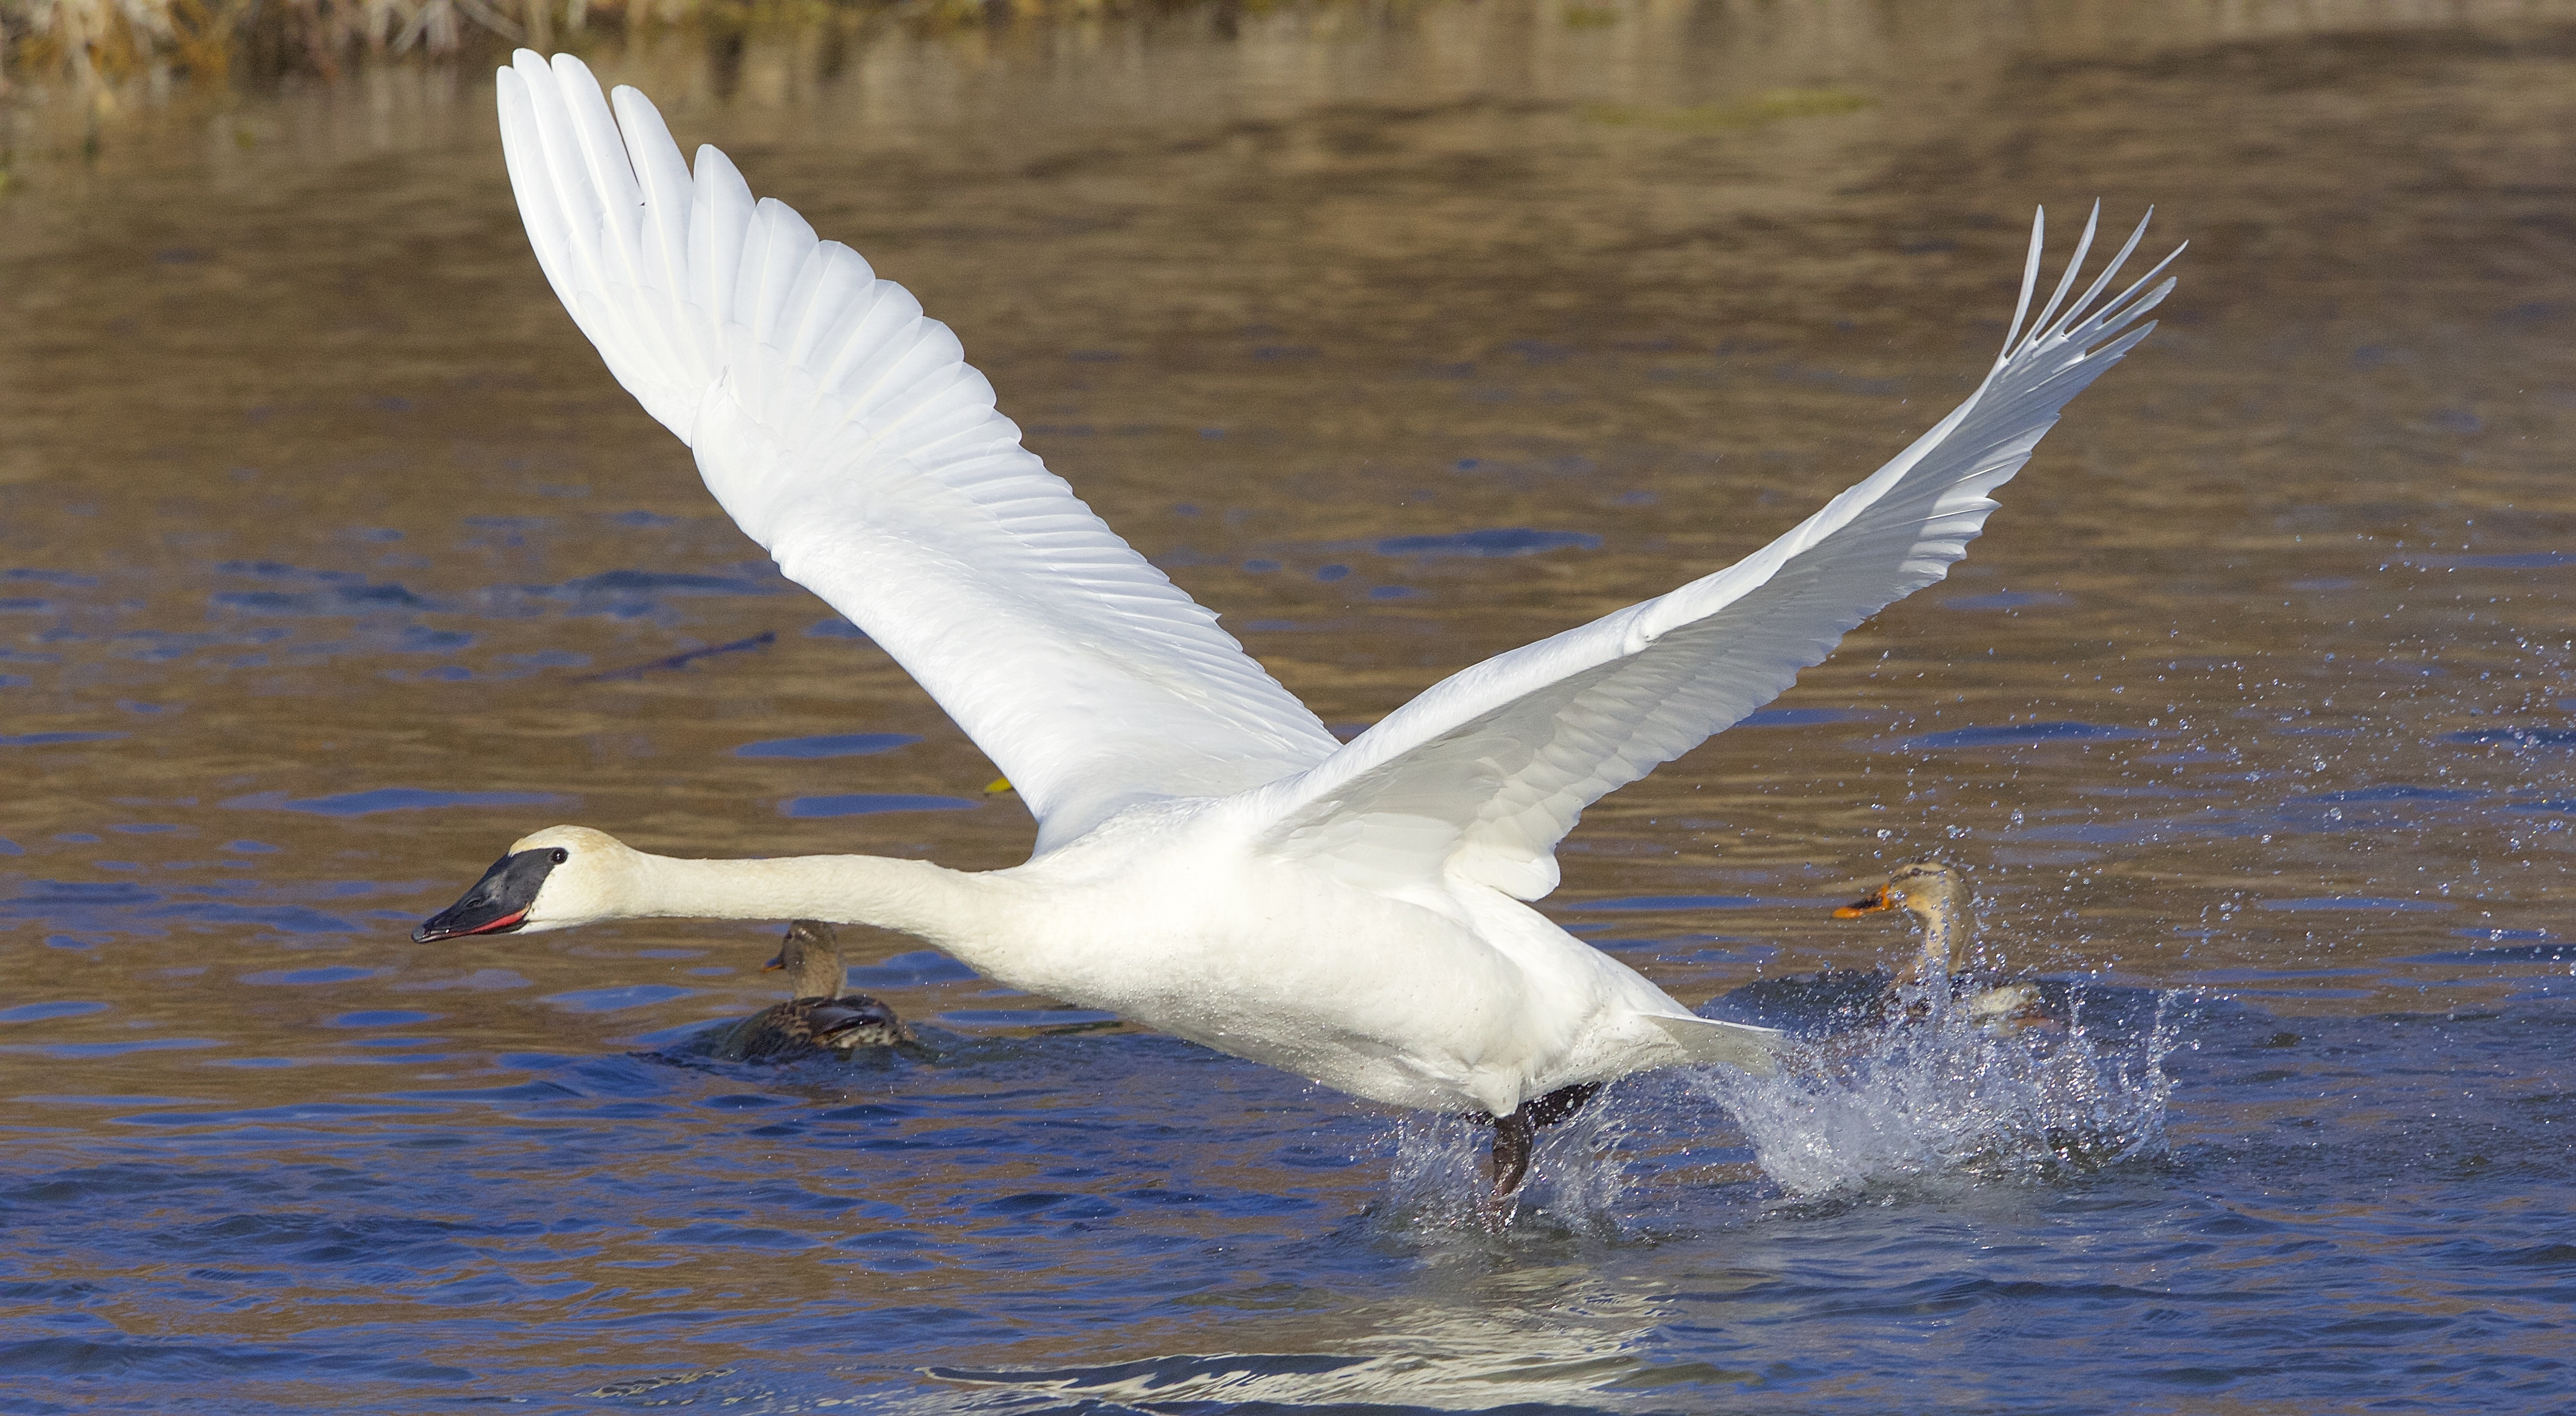 Trumpeter swans photo